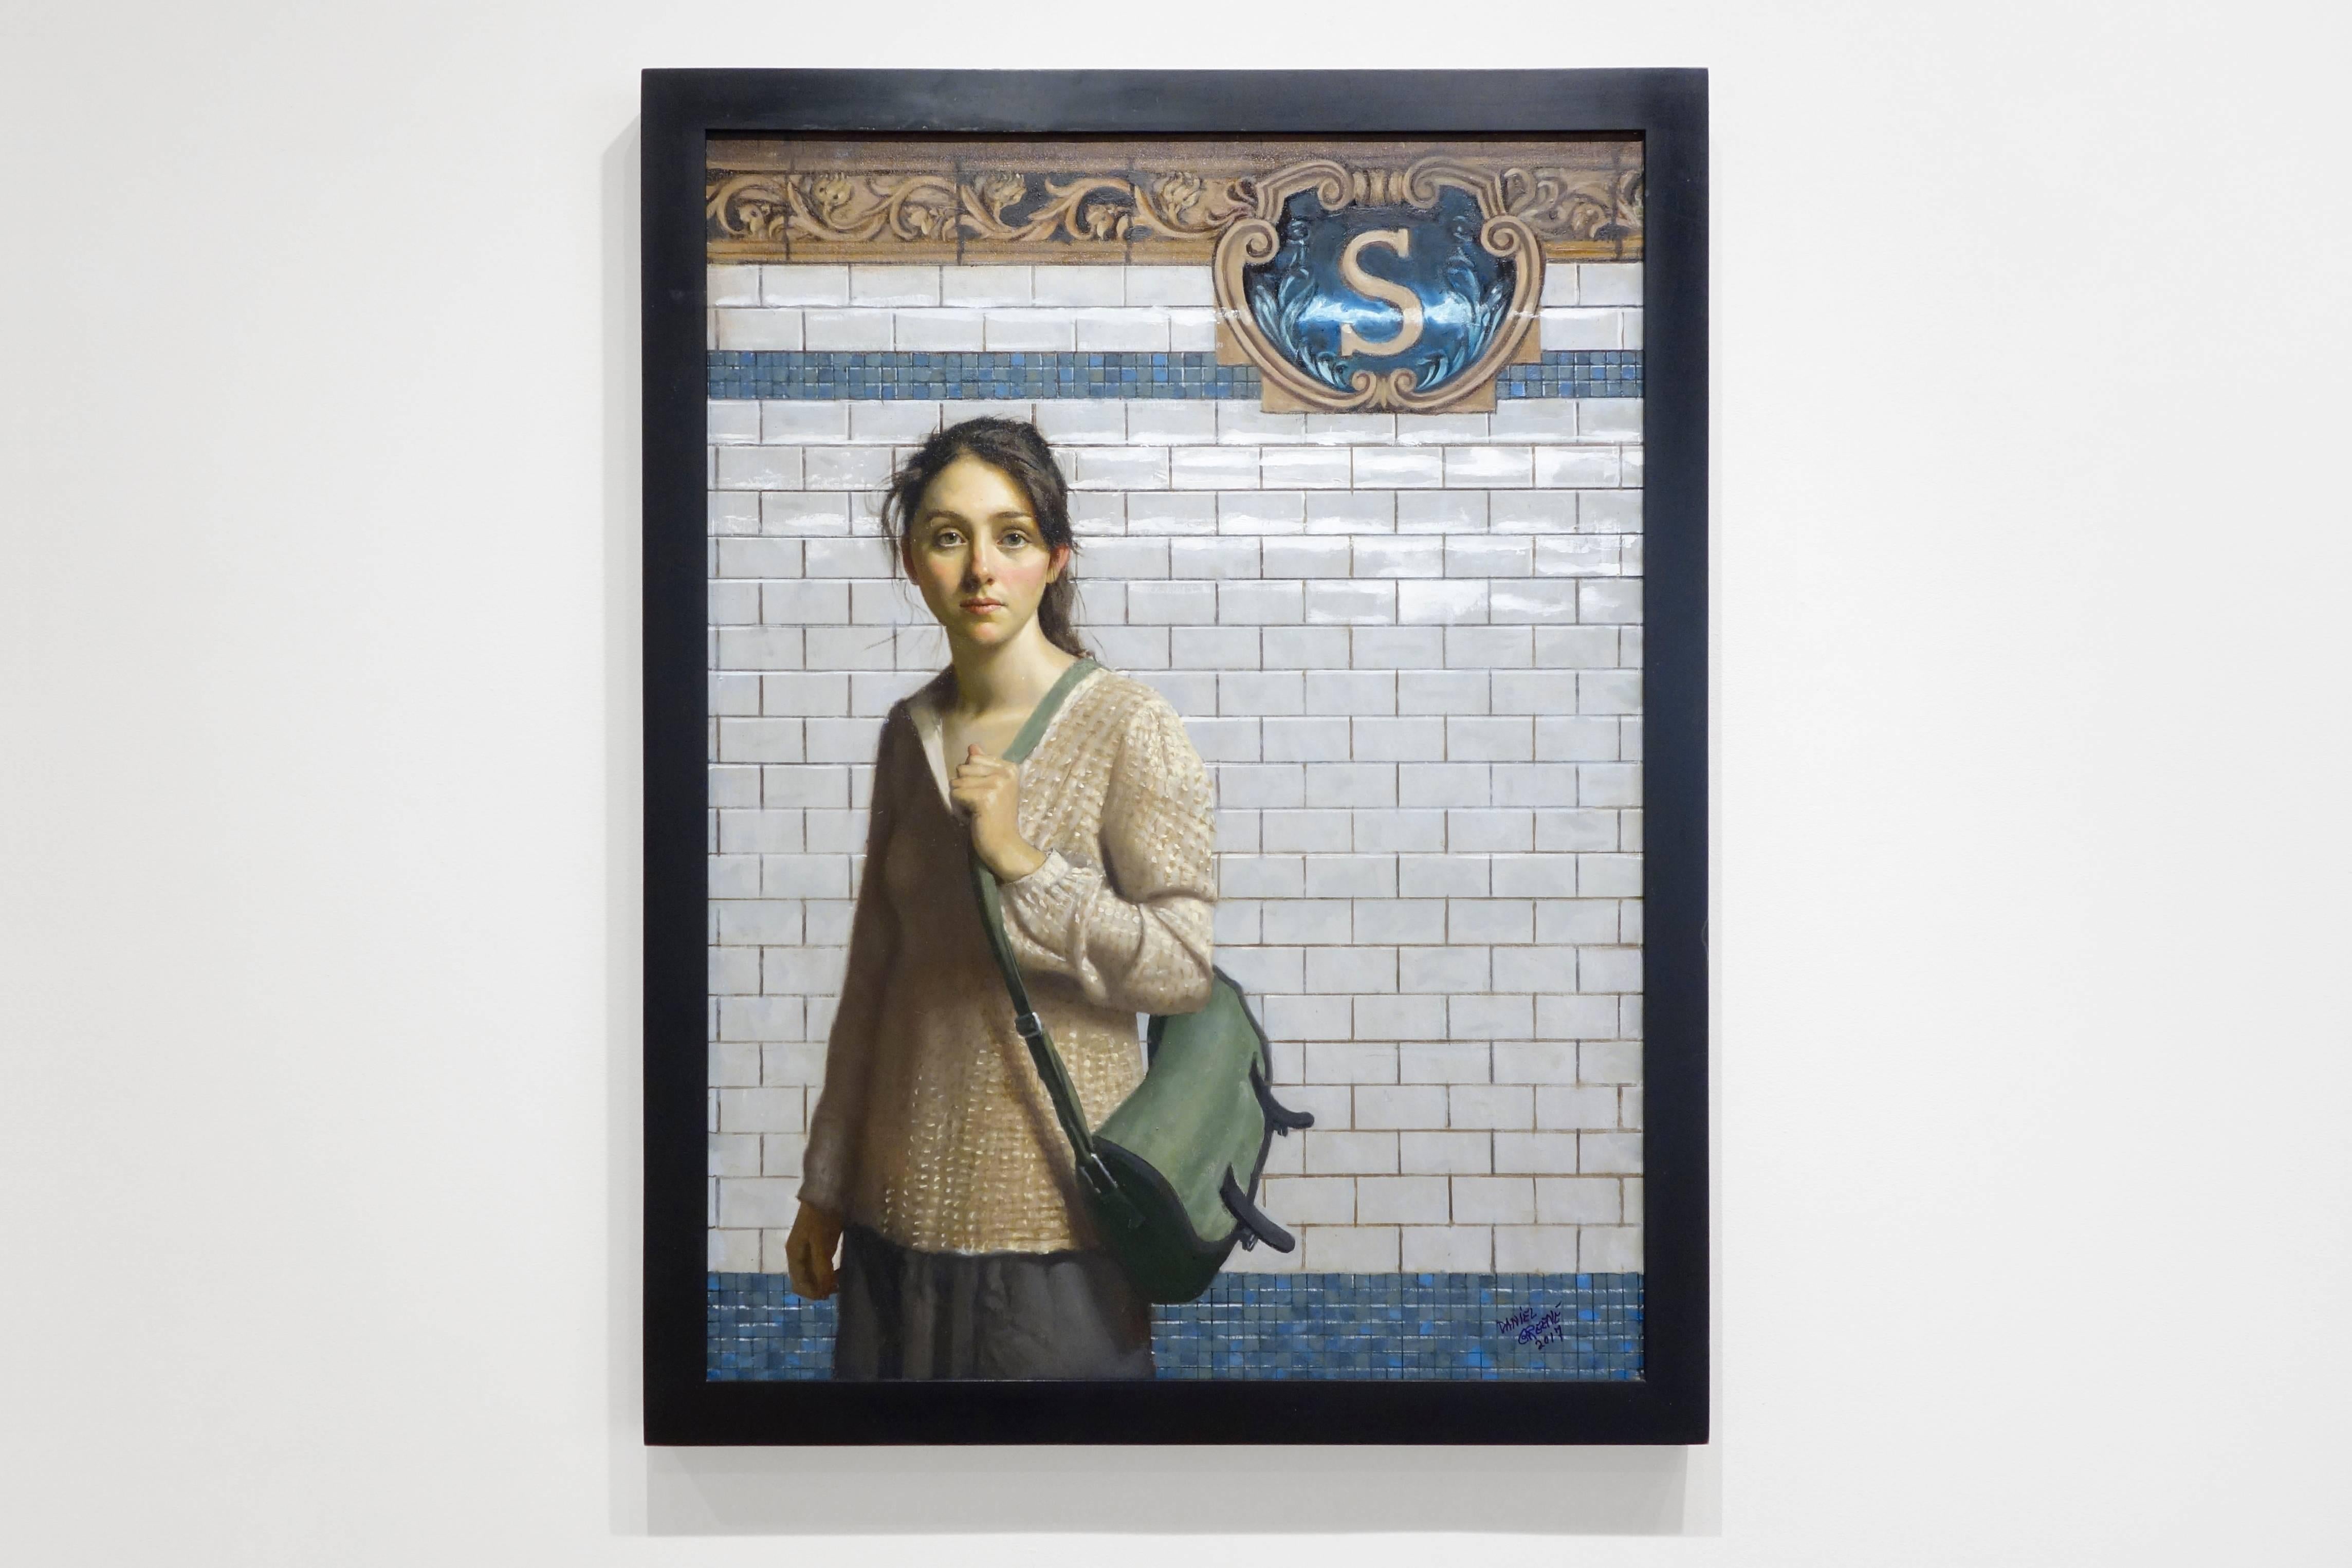 SOPHIE- SPRING ST., portrait of girl, subway station, new york city, hyper-real - Painting by Daniel Greene